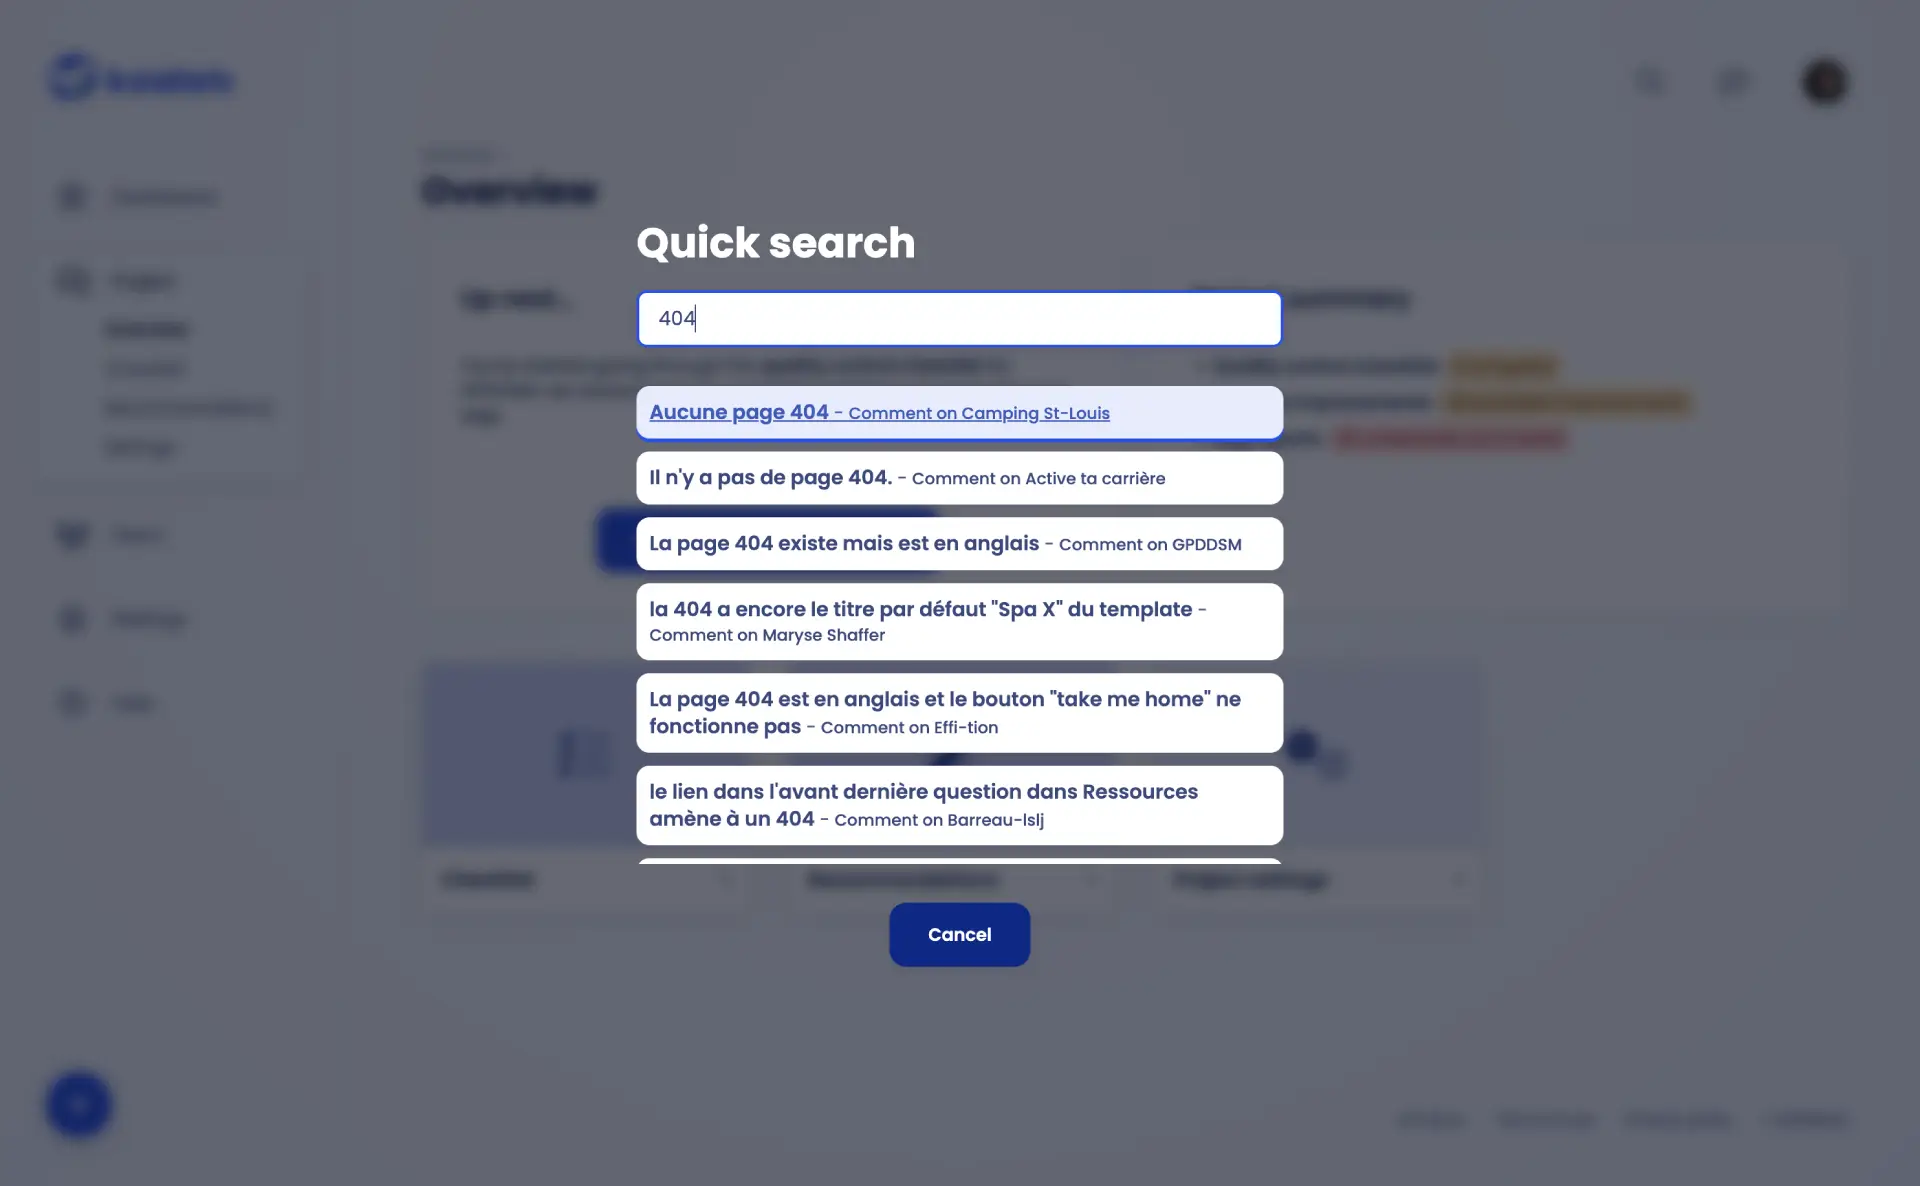 Quick Search overlay in the Koalati app. The user has typed 404 in the search bar, and the results show a list of comments about missing or problematic 404 pages on various projects.